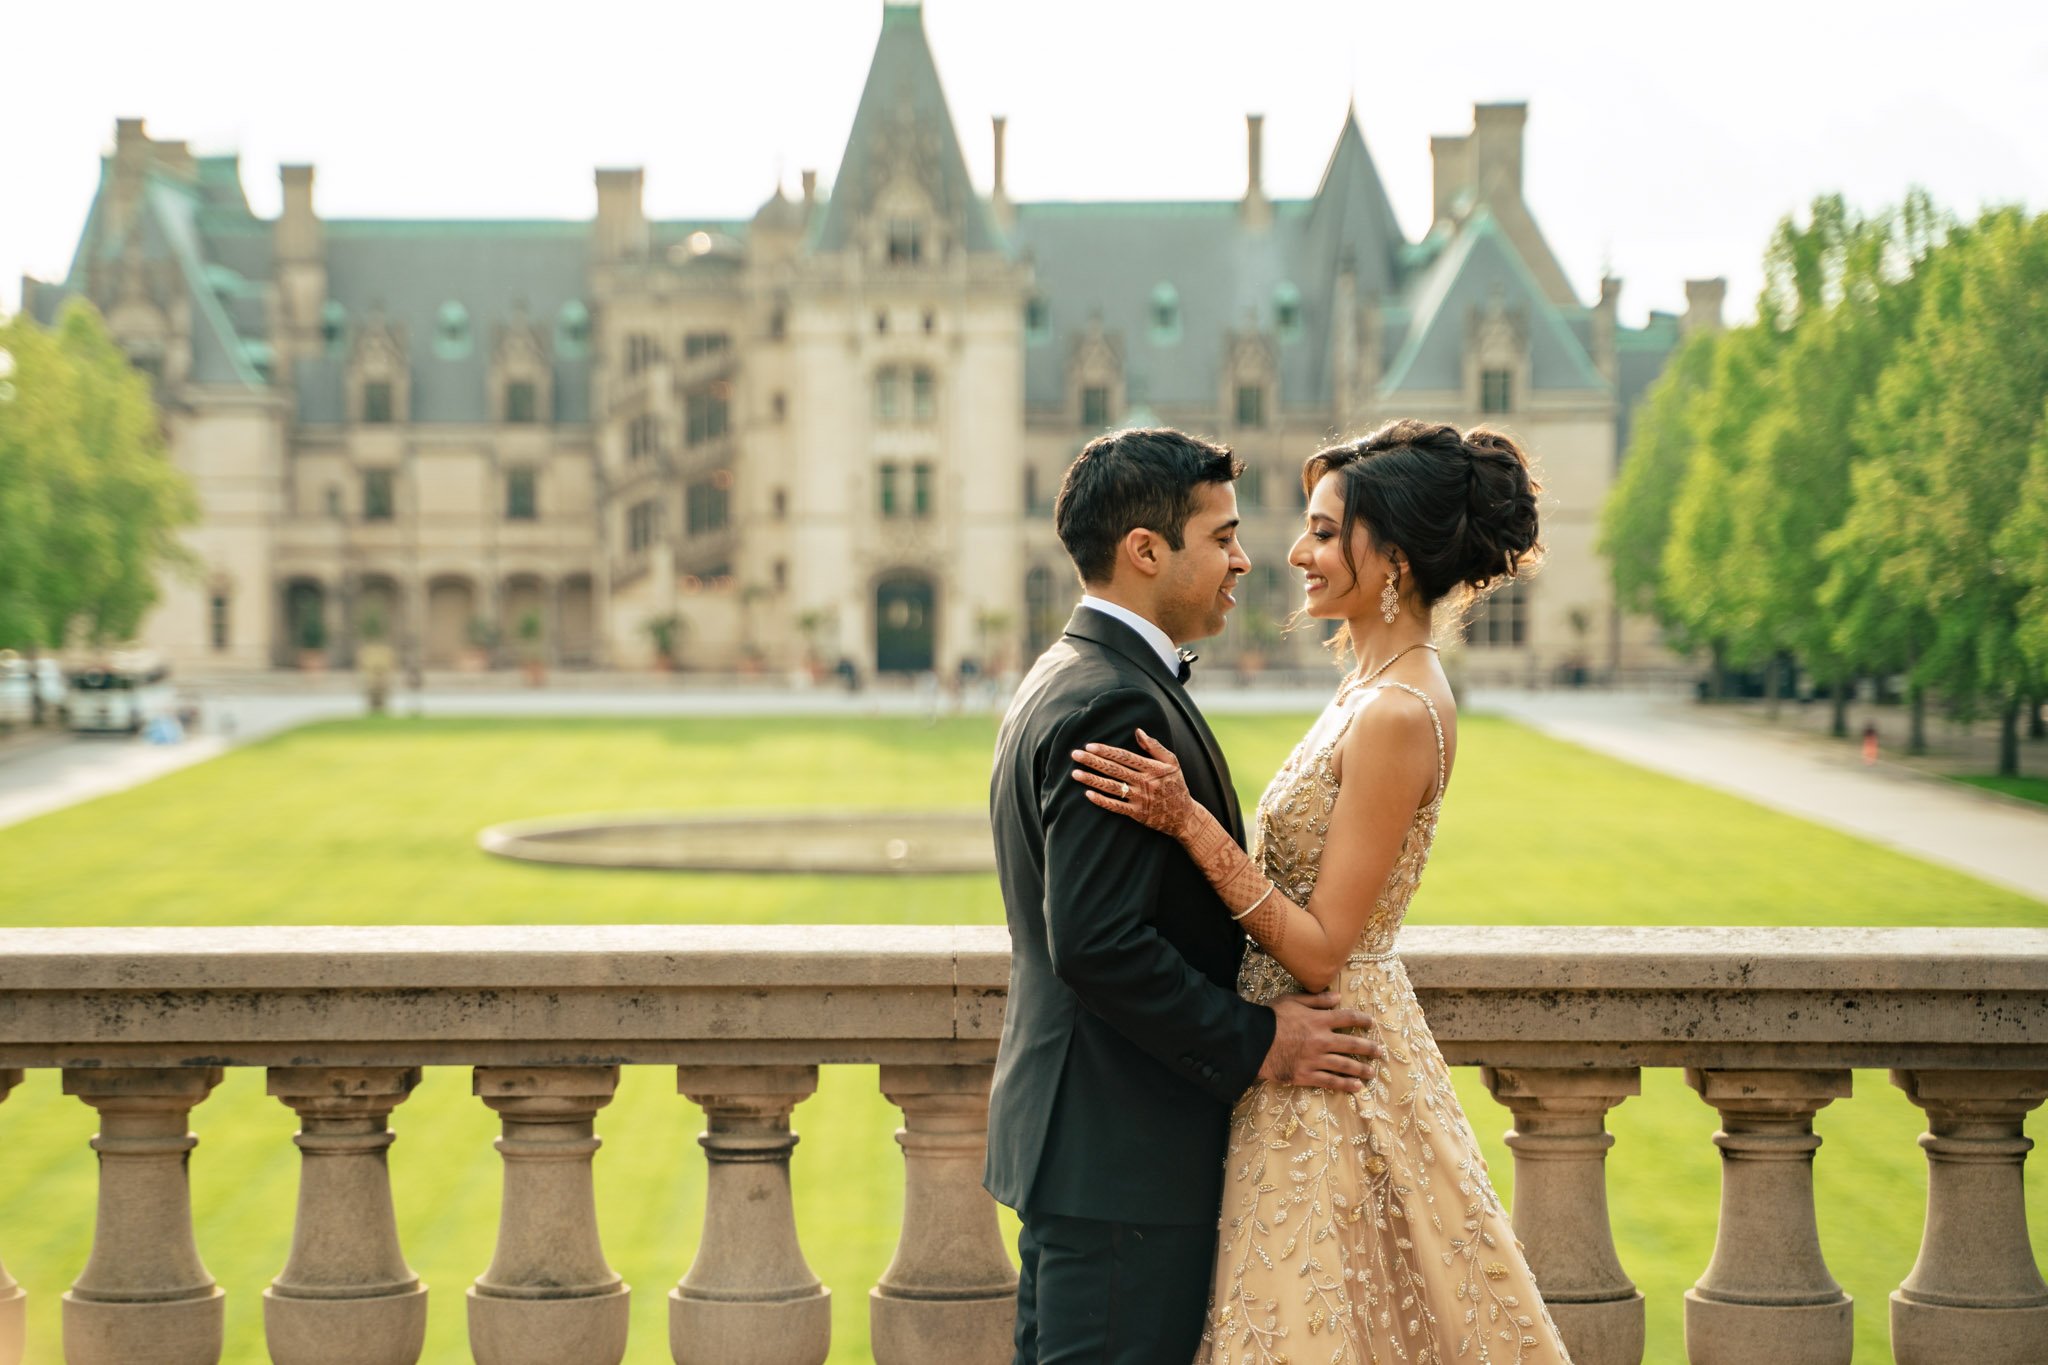 A couple poses for a wedding photo at Biltmore Estate.